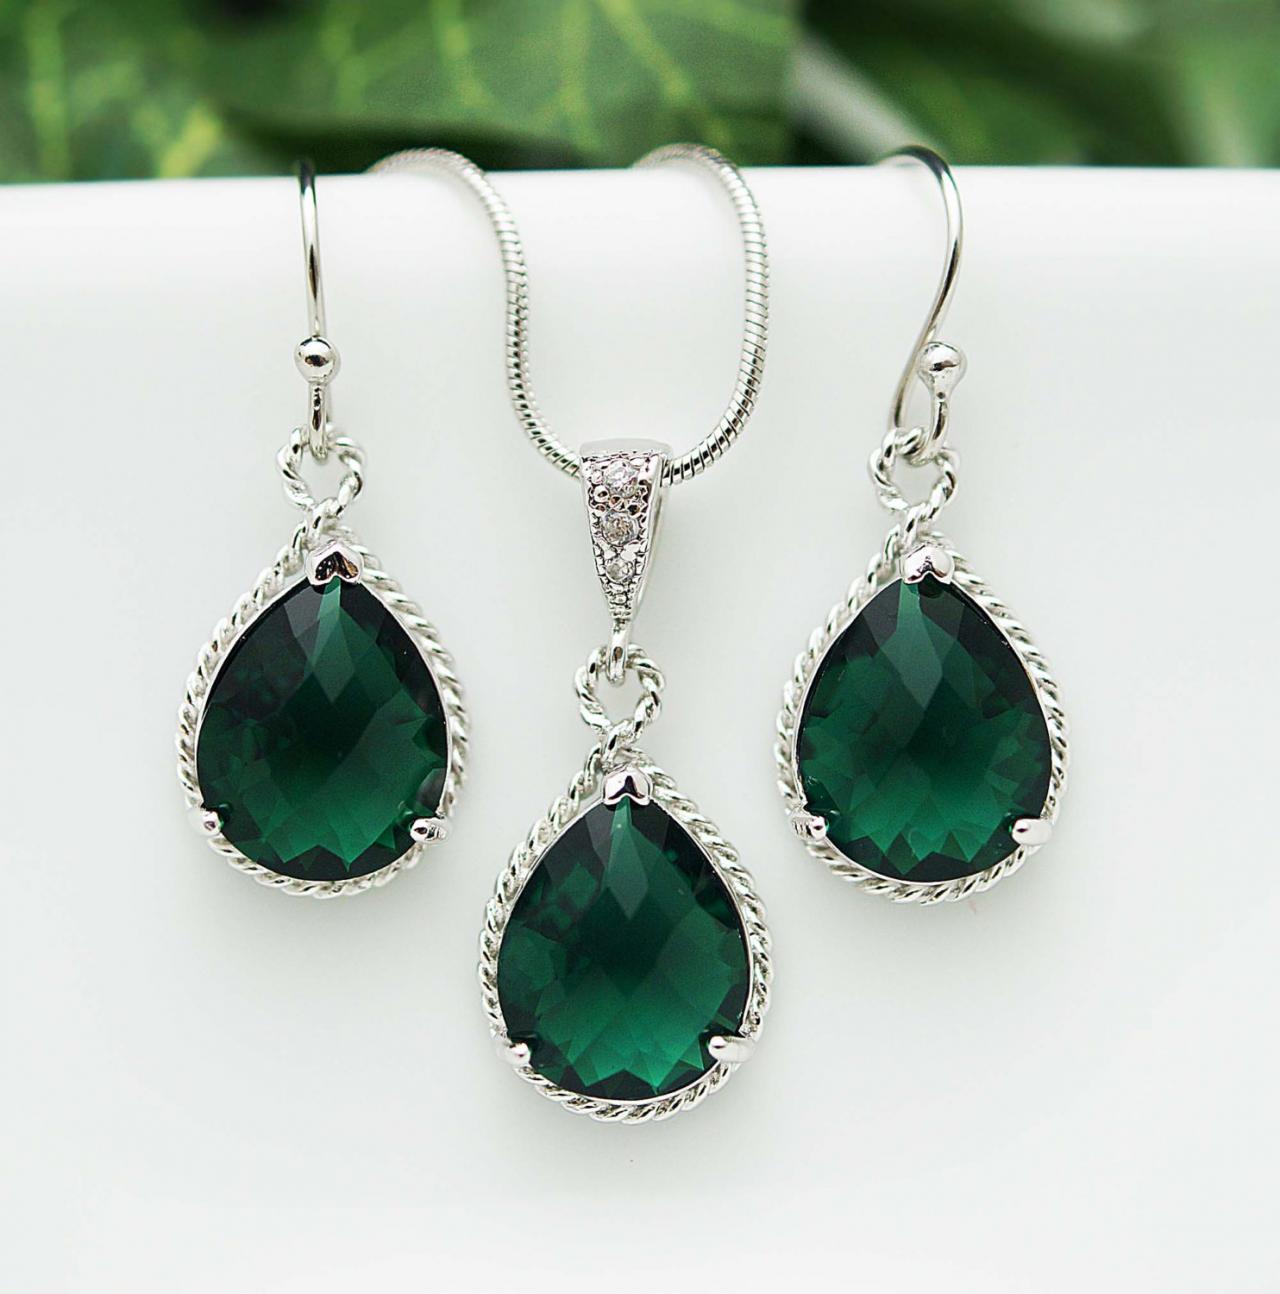 Wedding Jewelry Bridesmaid Jewelry Bridesmaid Earrings Bridesmaid Necklace Emerald Glass Rhodium Trimmed Pear Cut Bridesmaid gift